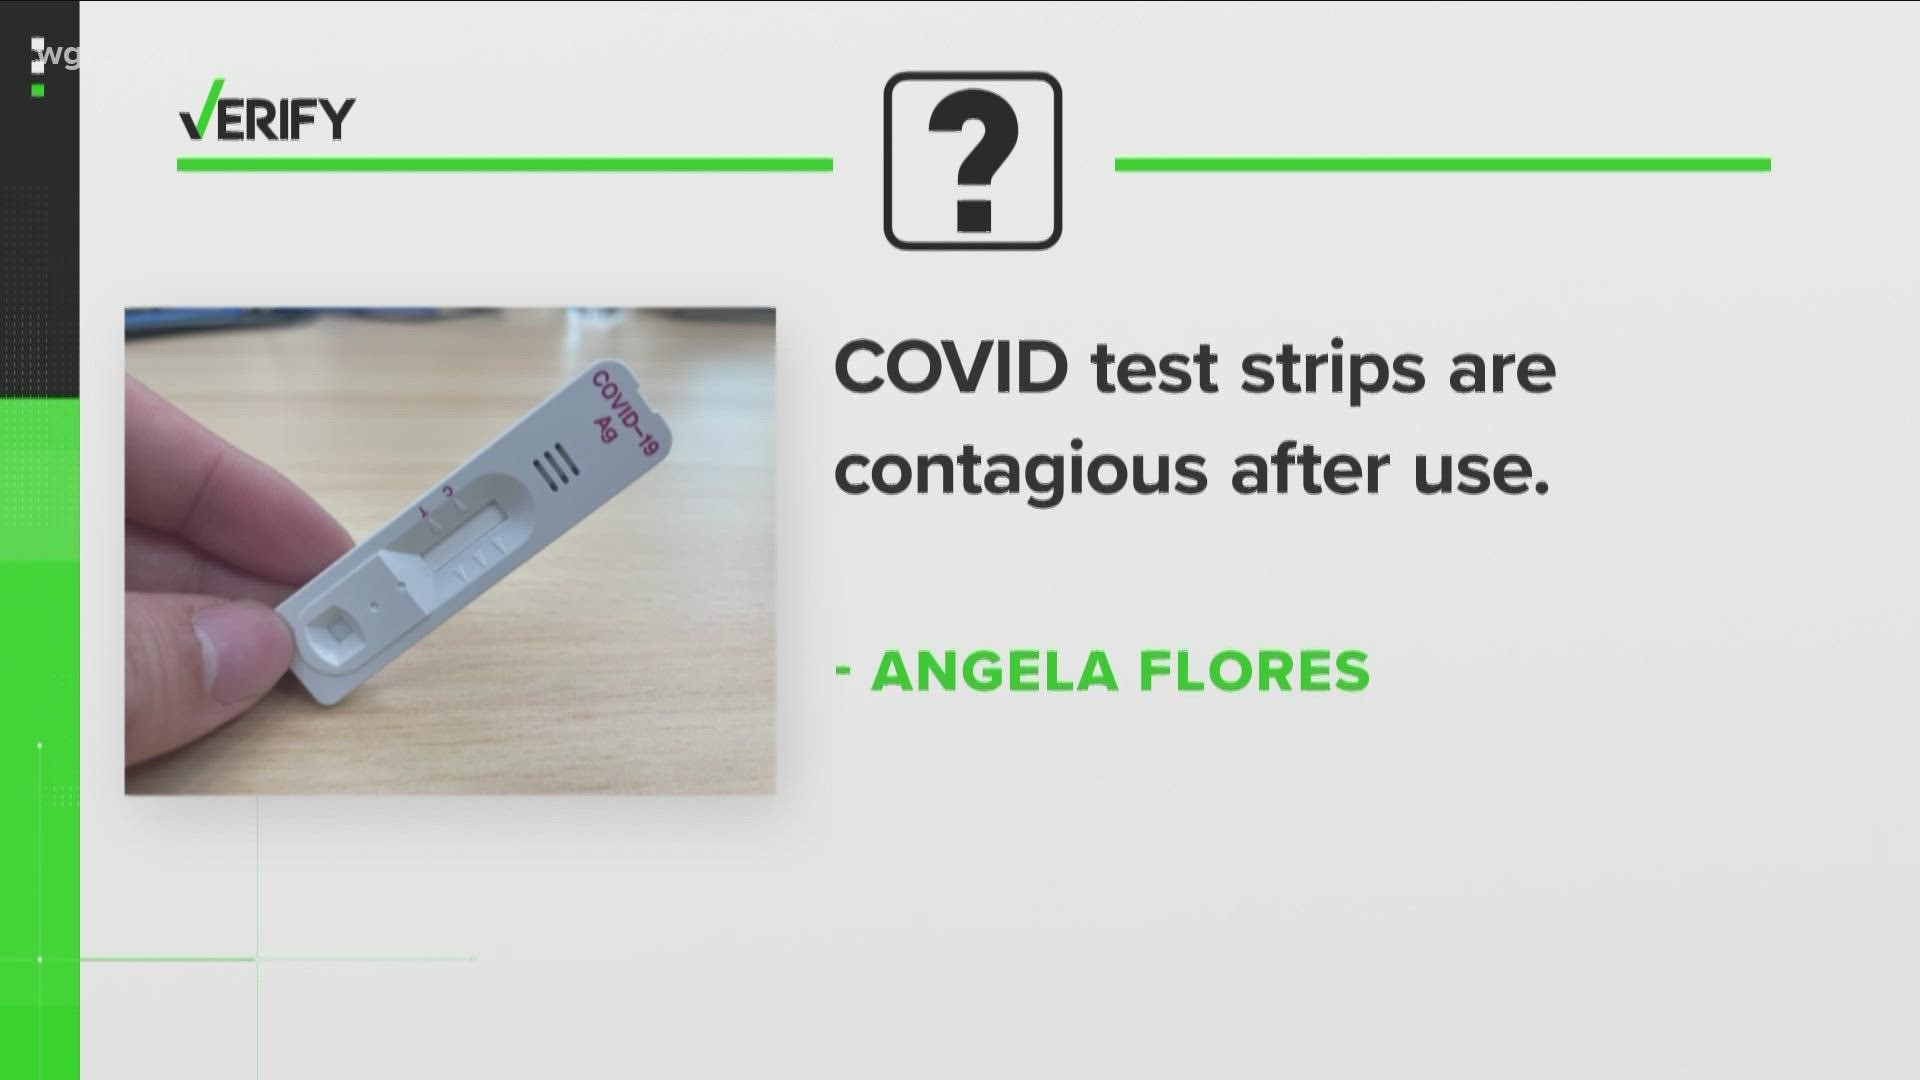 VERIFY was asked whether test strips are contagious after use. Yes, they are, but the risk is low.